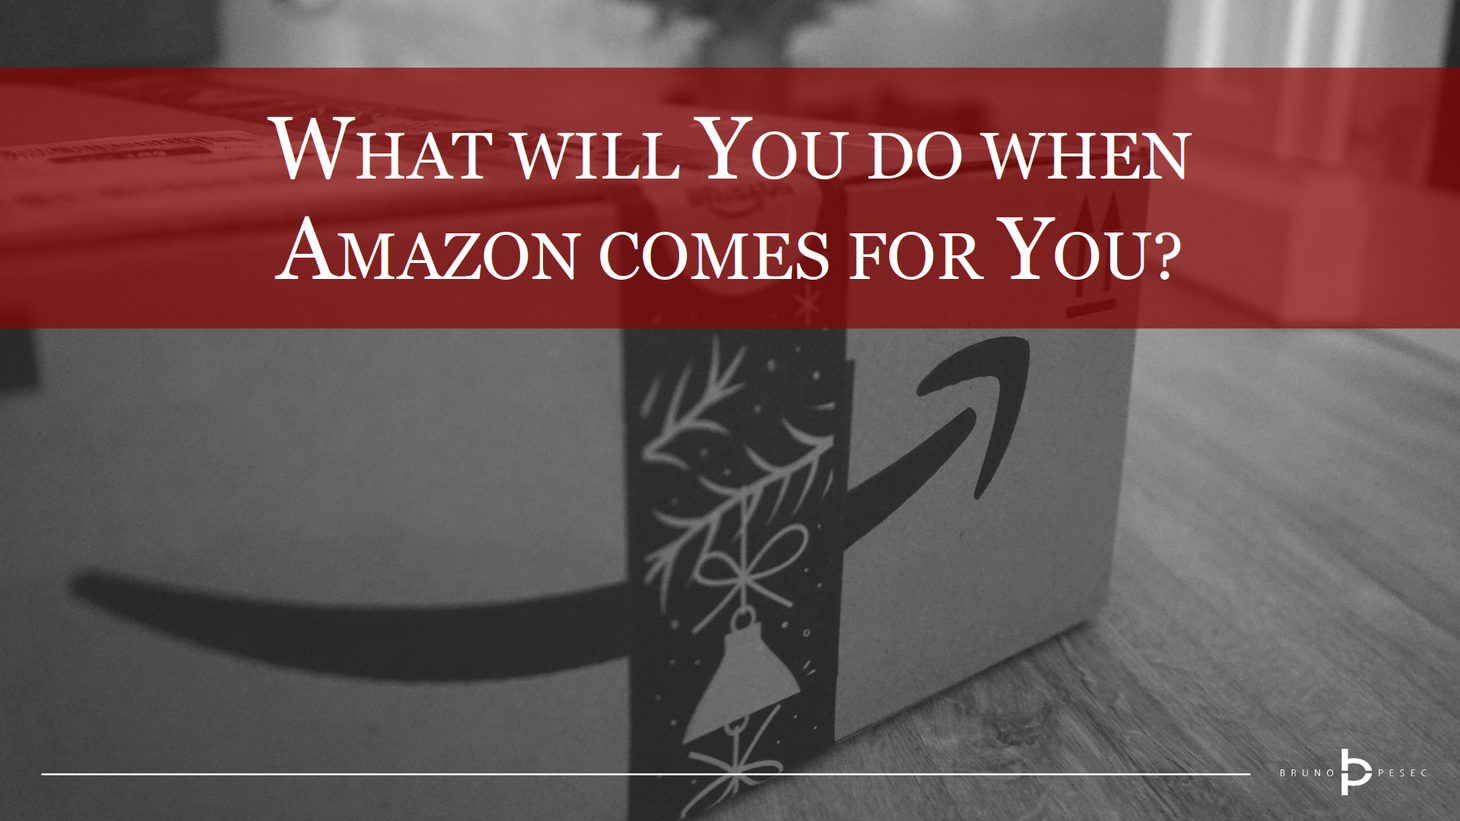 What will you do when Amazon comes for you?